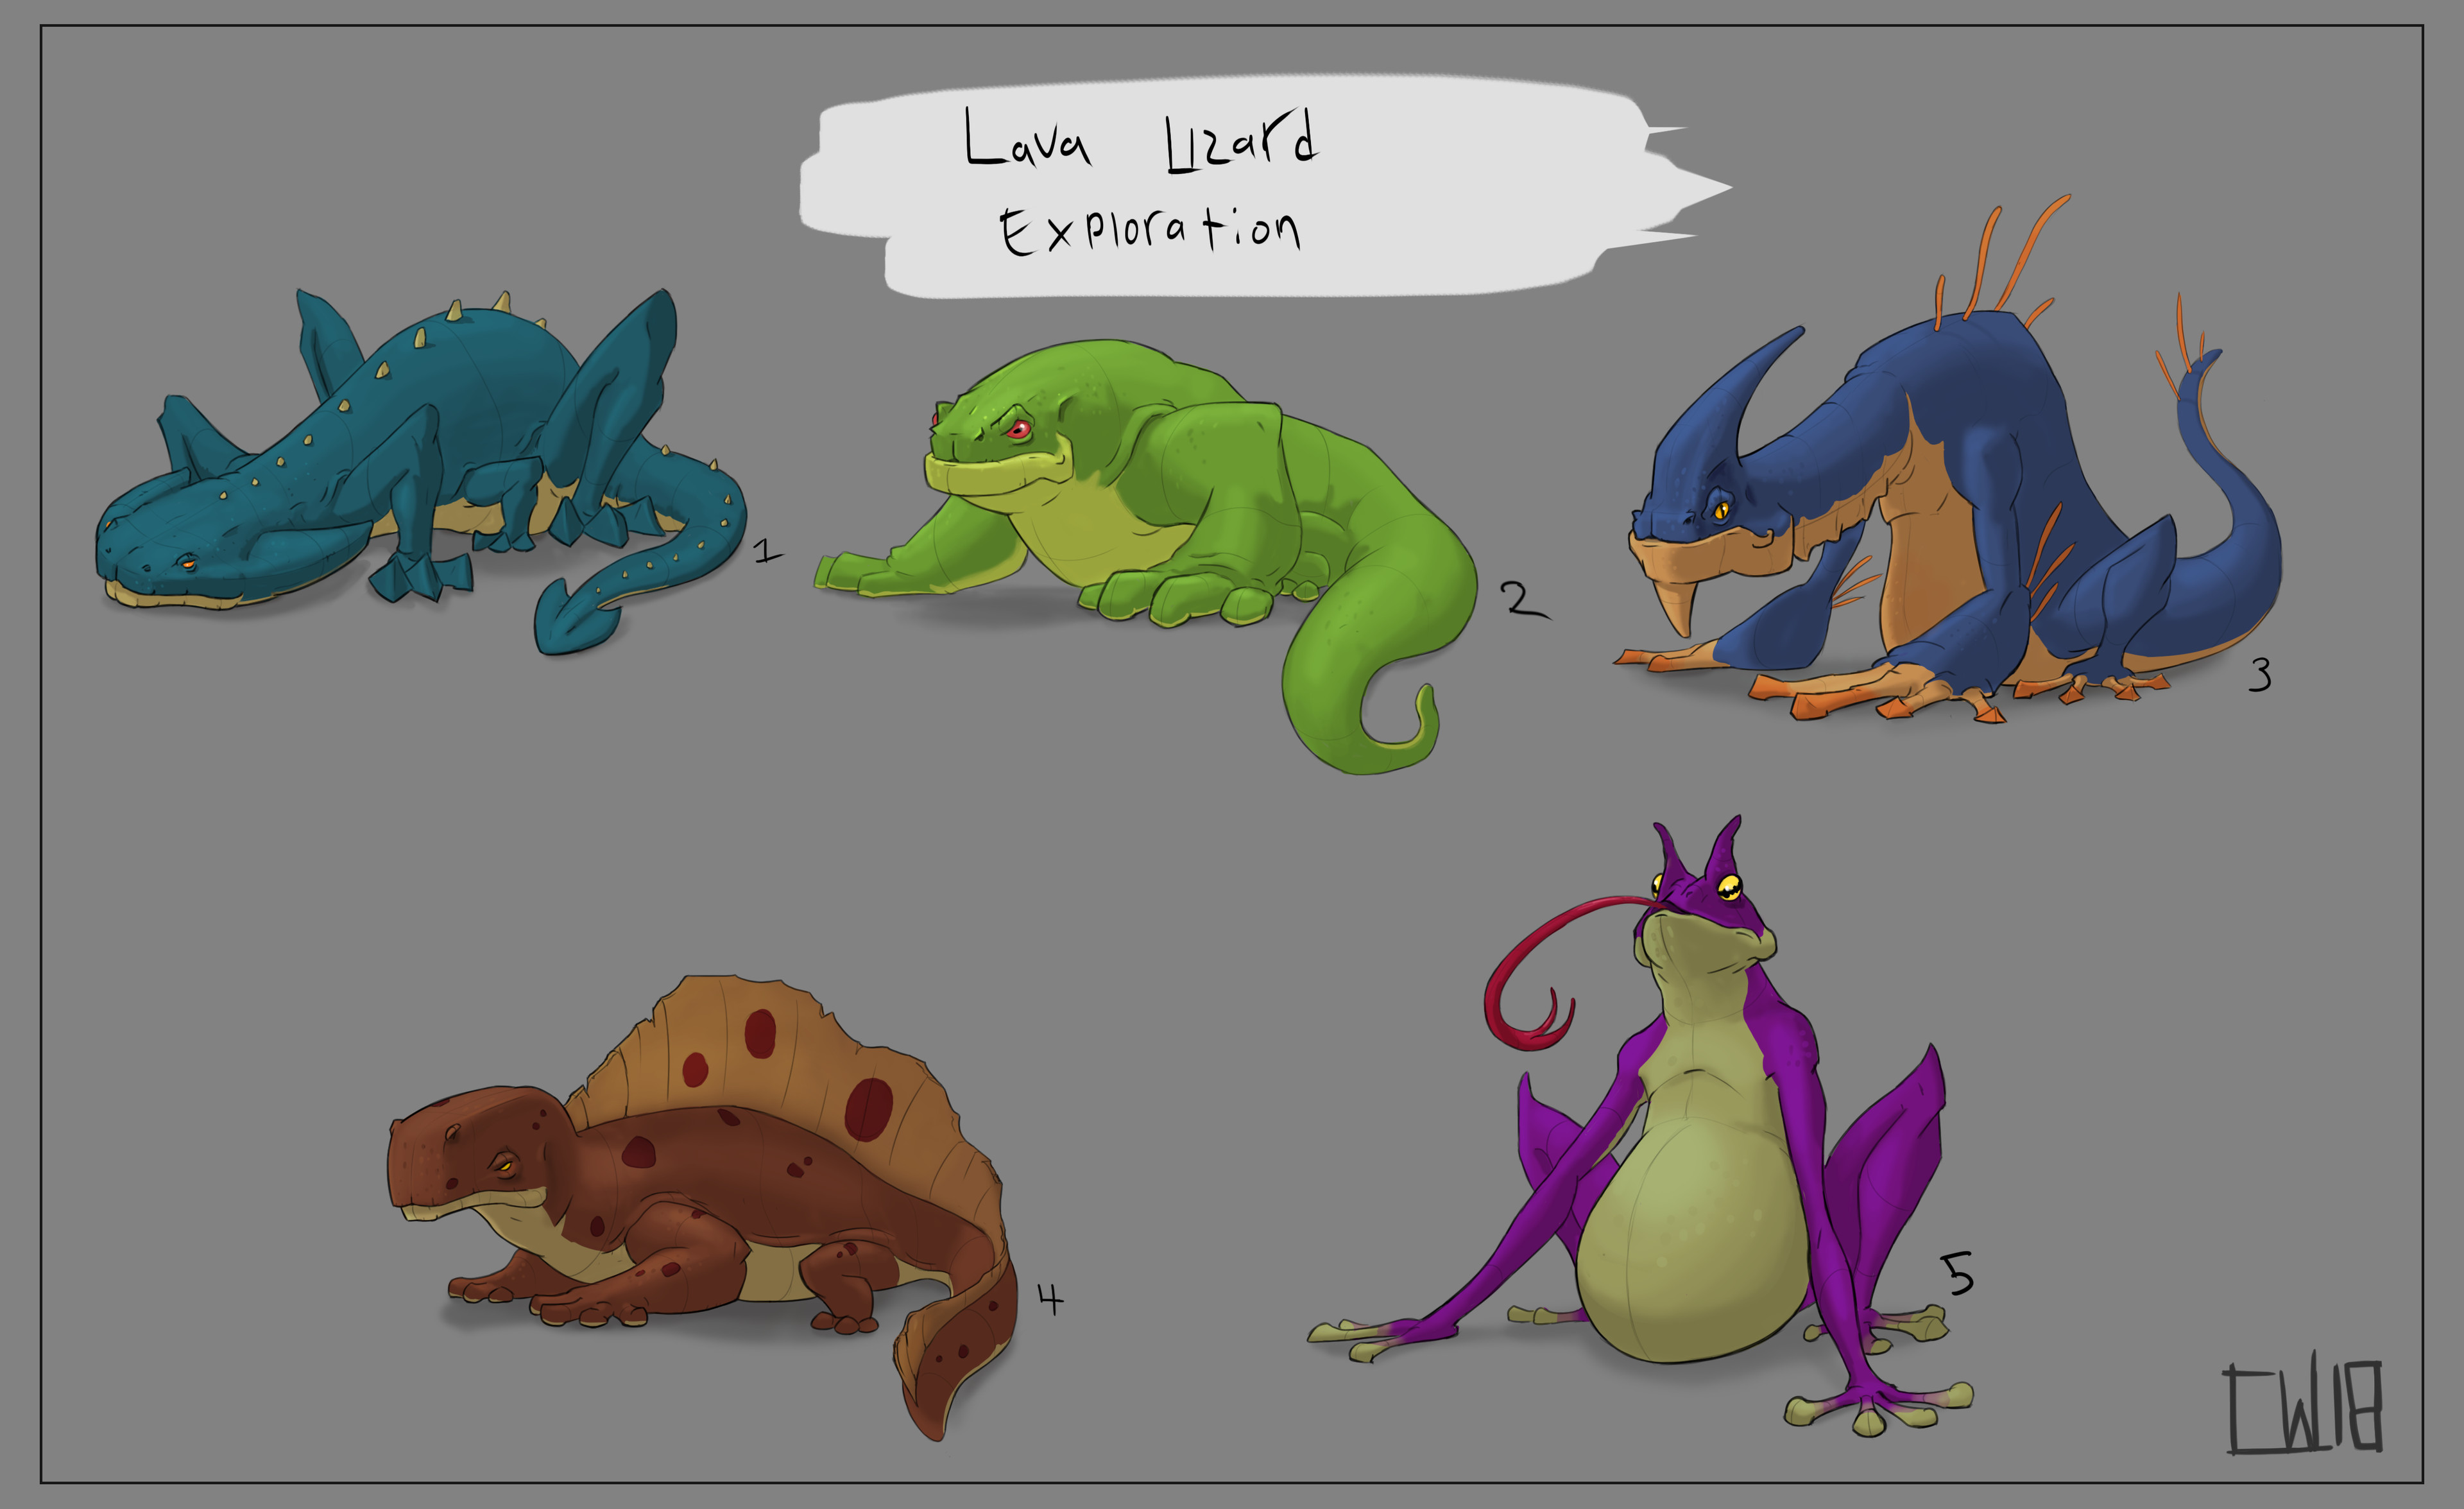 These are the initial exploration sketches. I was experimenting with color at this stage as well.